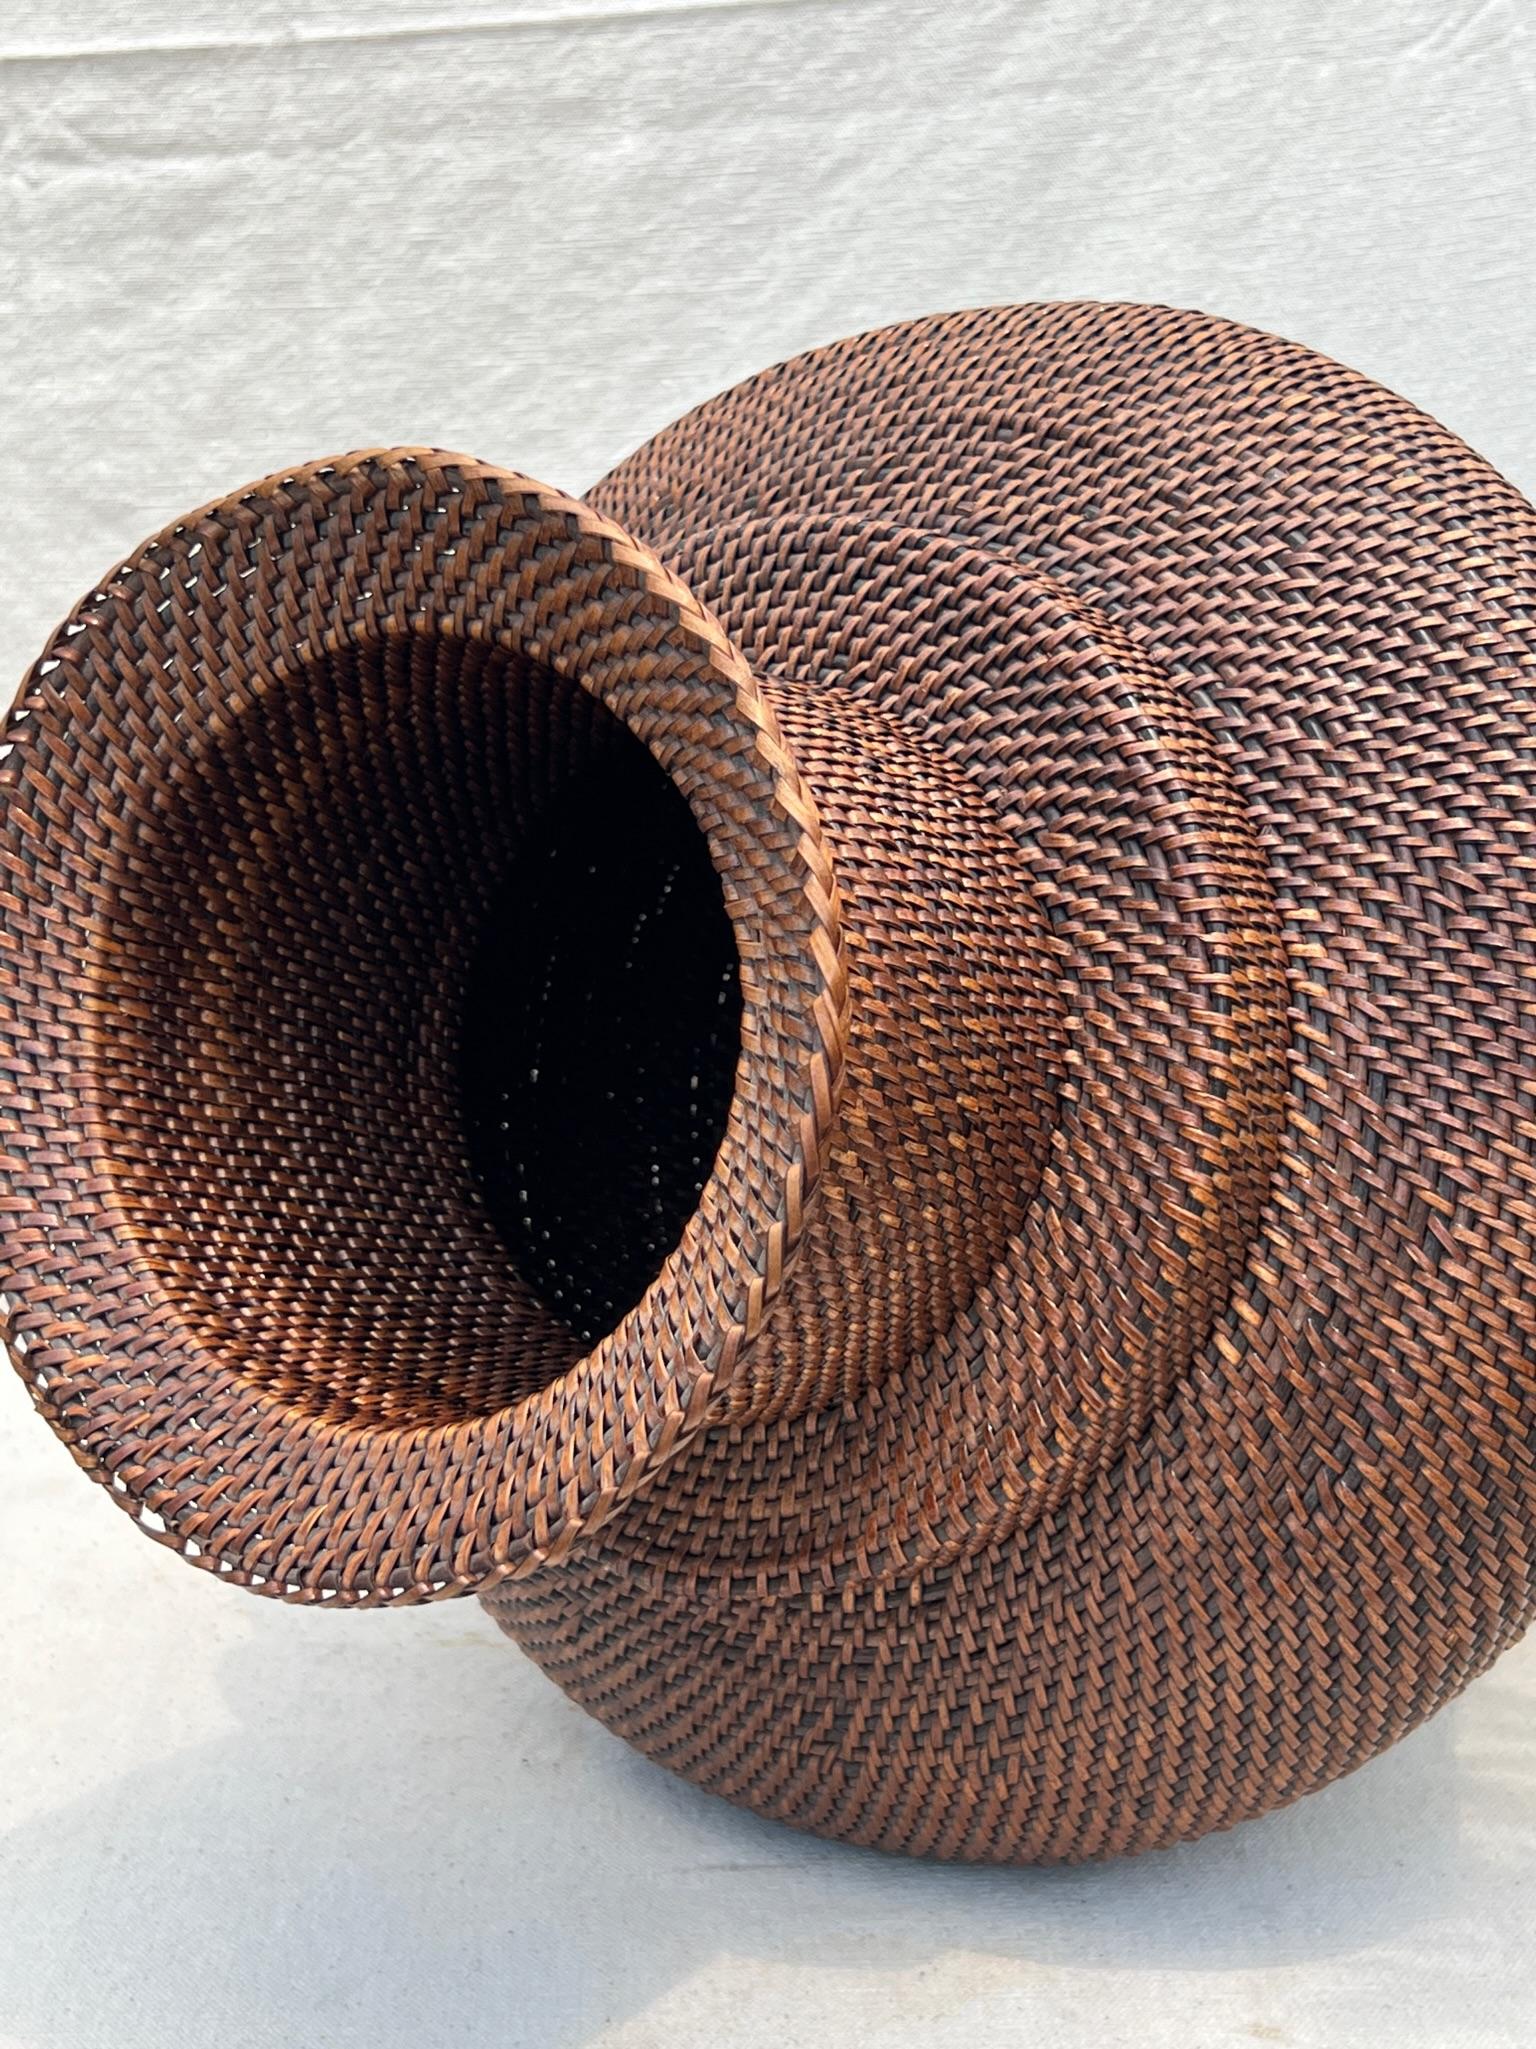 The brown rattan flower vase stands at 13.5 inches tall, and a perfect balance between being a statement piece and a complementary accent to any setting. Its versatile size allows you to display it on your mantel, coffee table, dining table, or as a